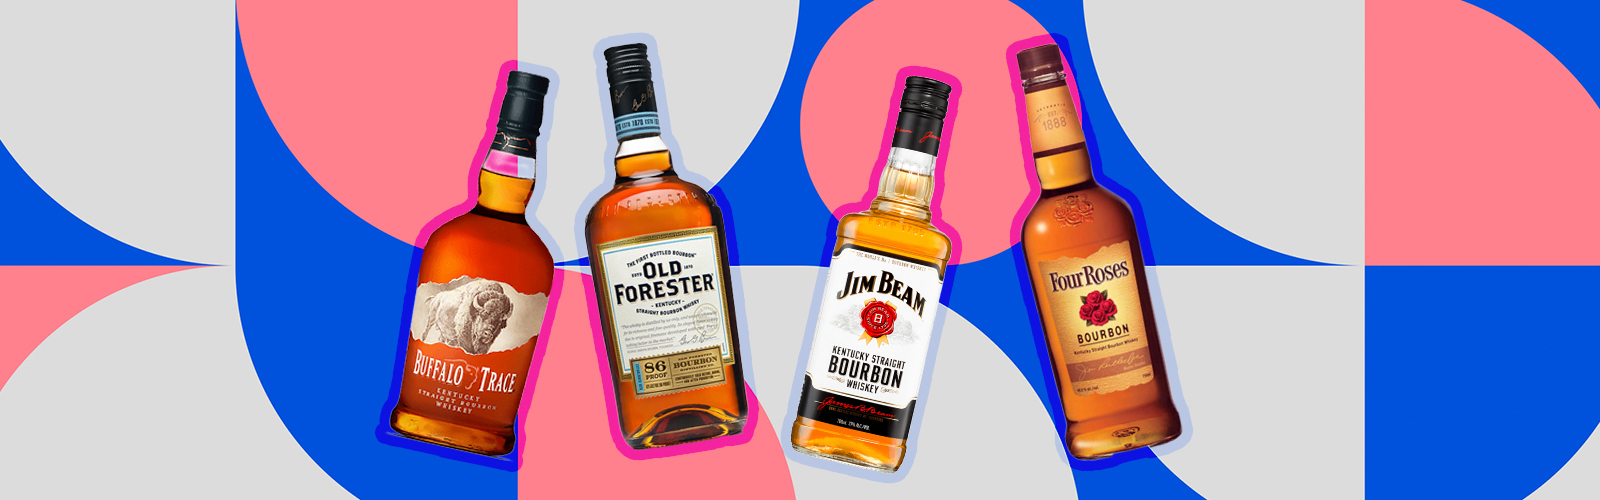 Buffalo Trace/Old Forester/Jim Beam/Four Roses/istock/Uproxx